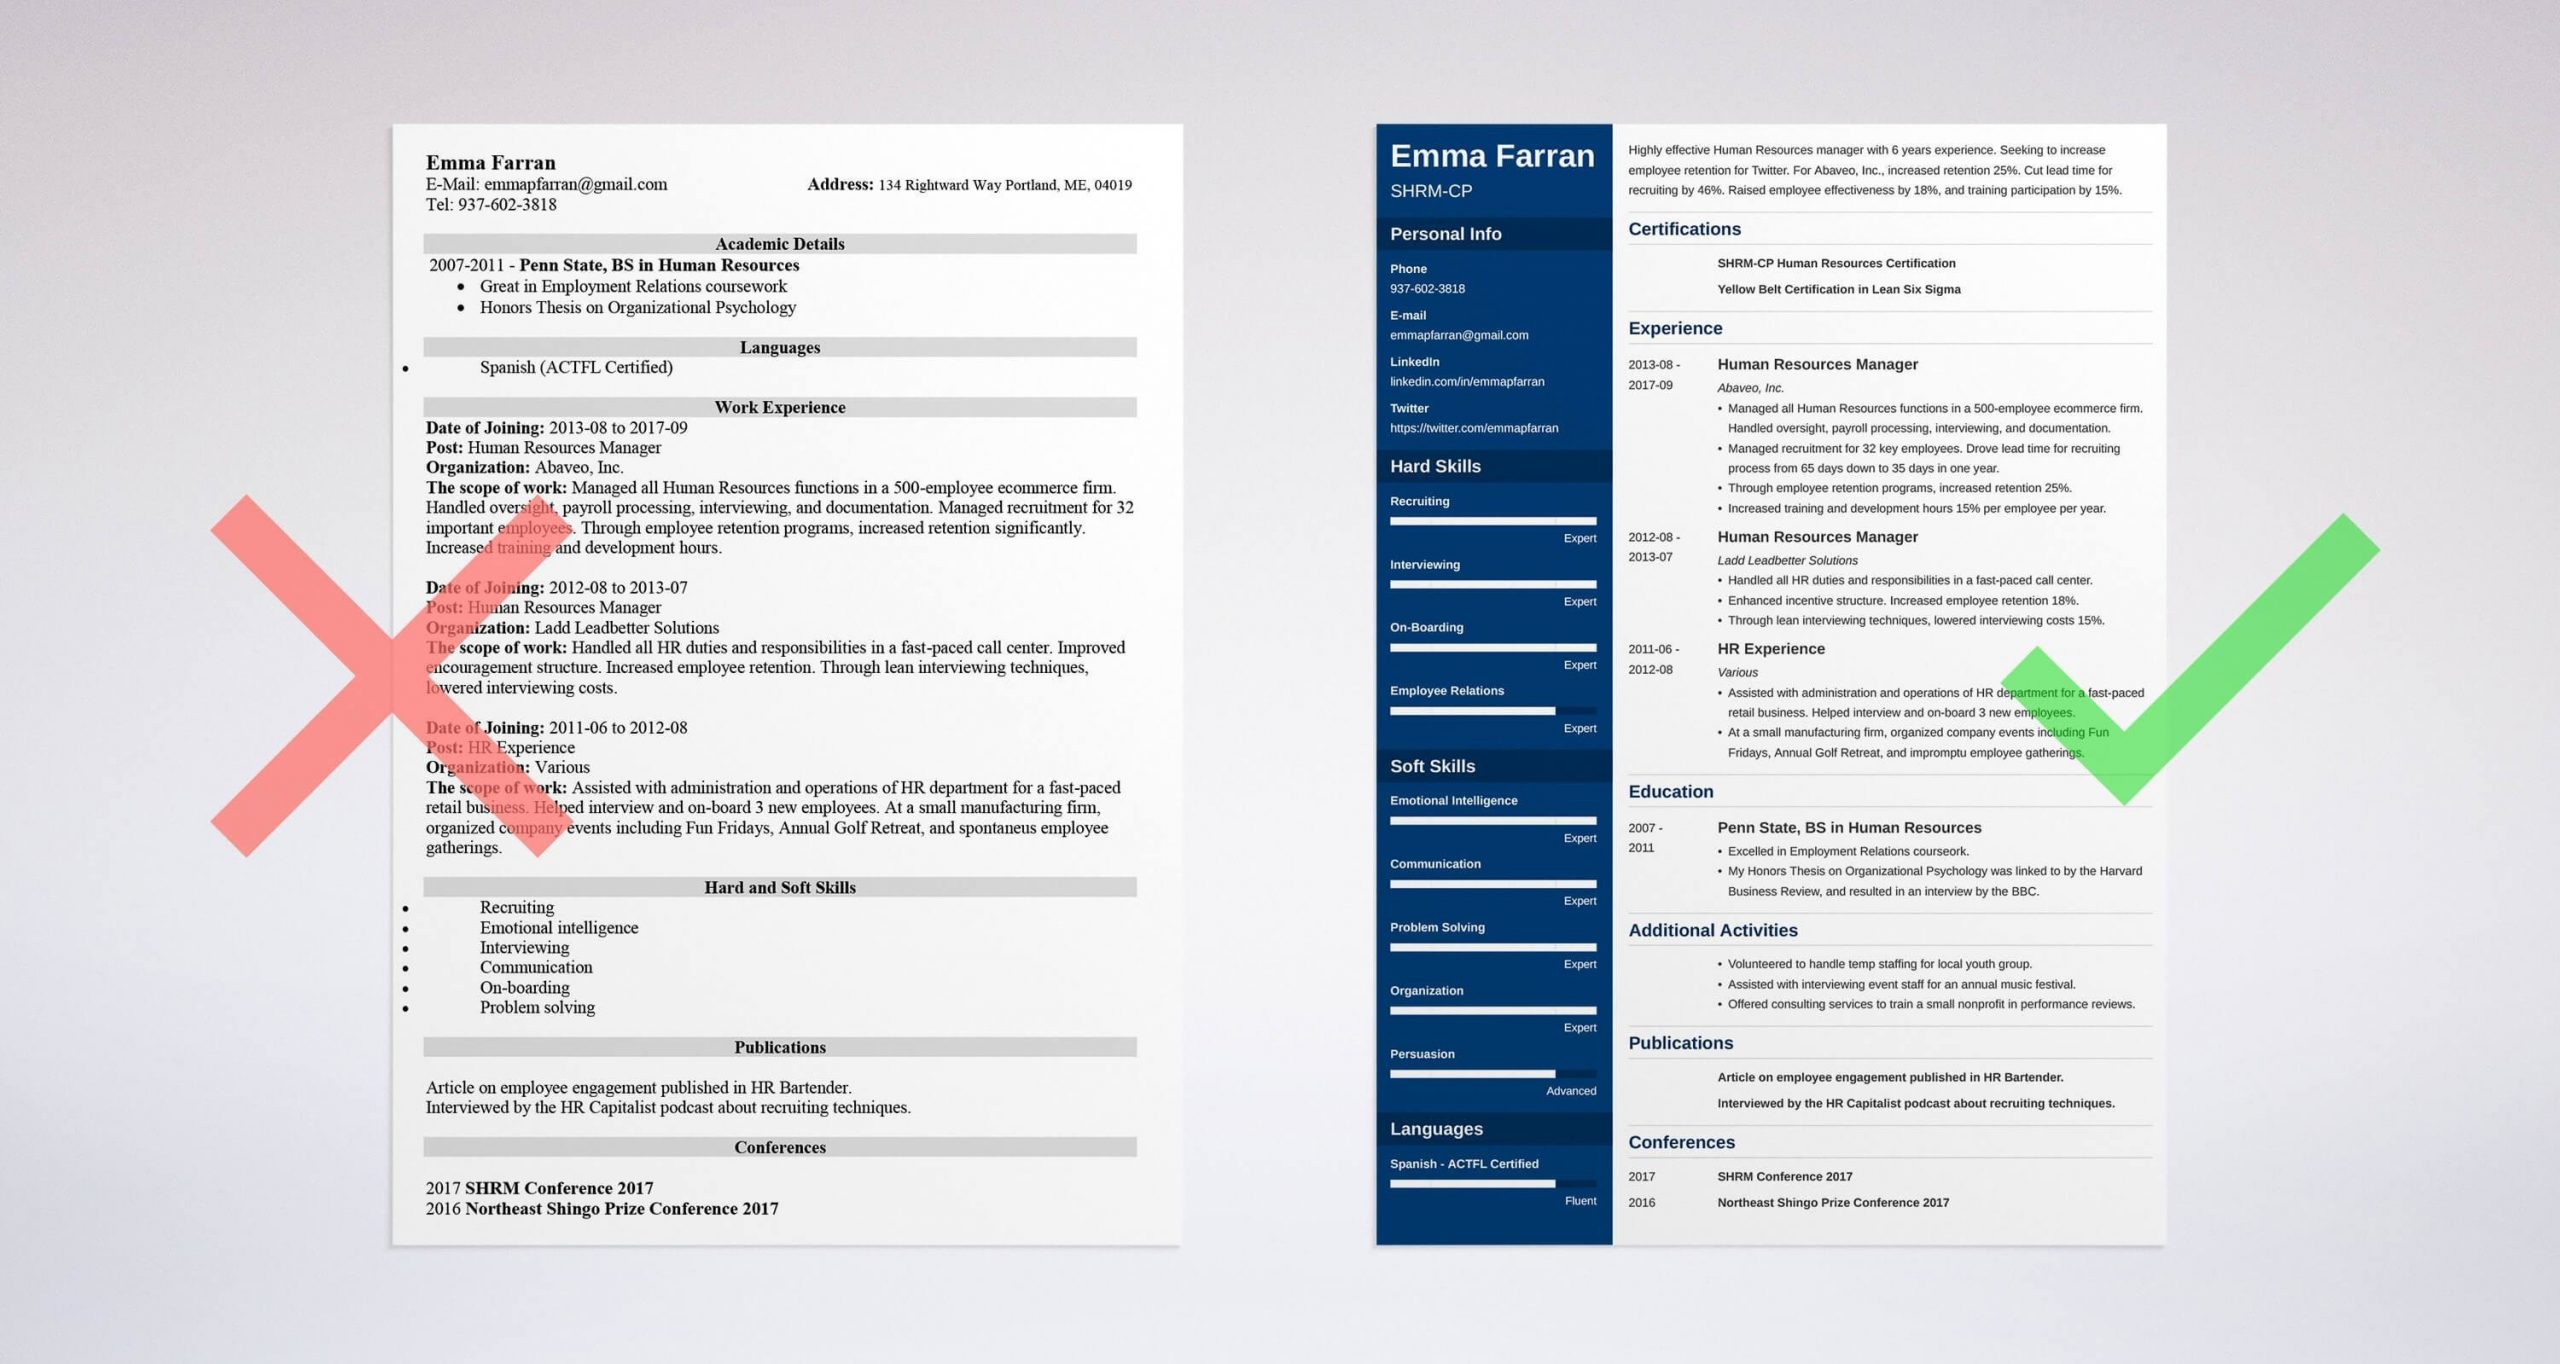 Human Resources Resume Templates Entry Level Human Resources (hr) Resume Examples & Guide (lancarrezekiq25 Tips)